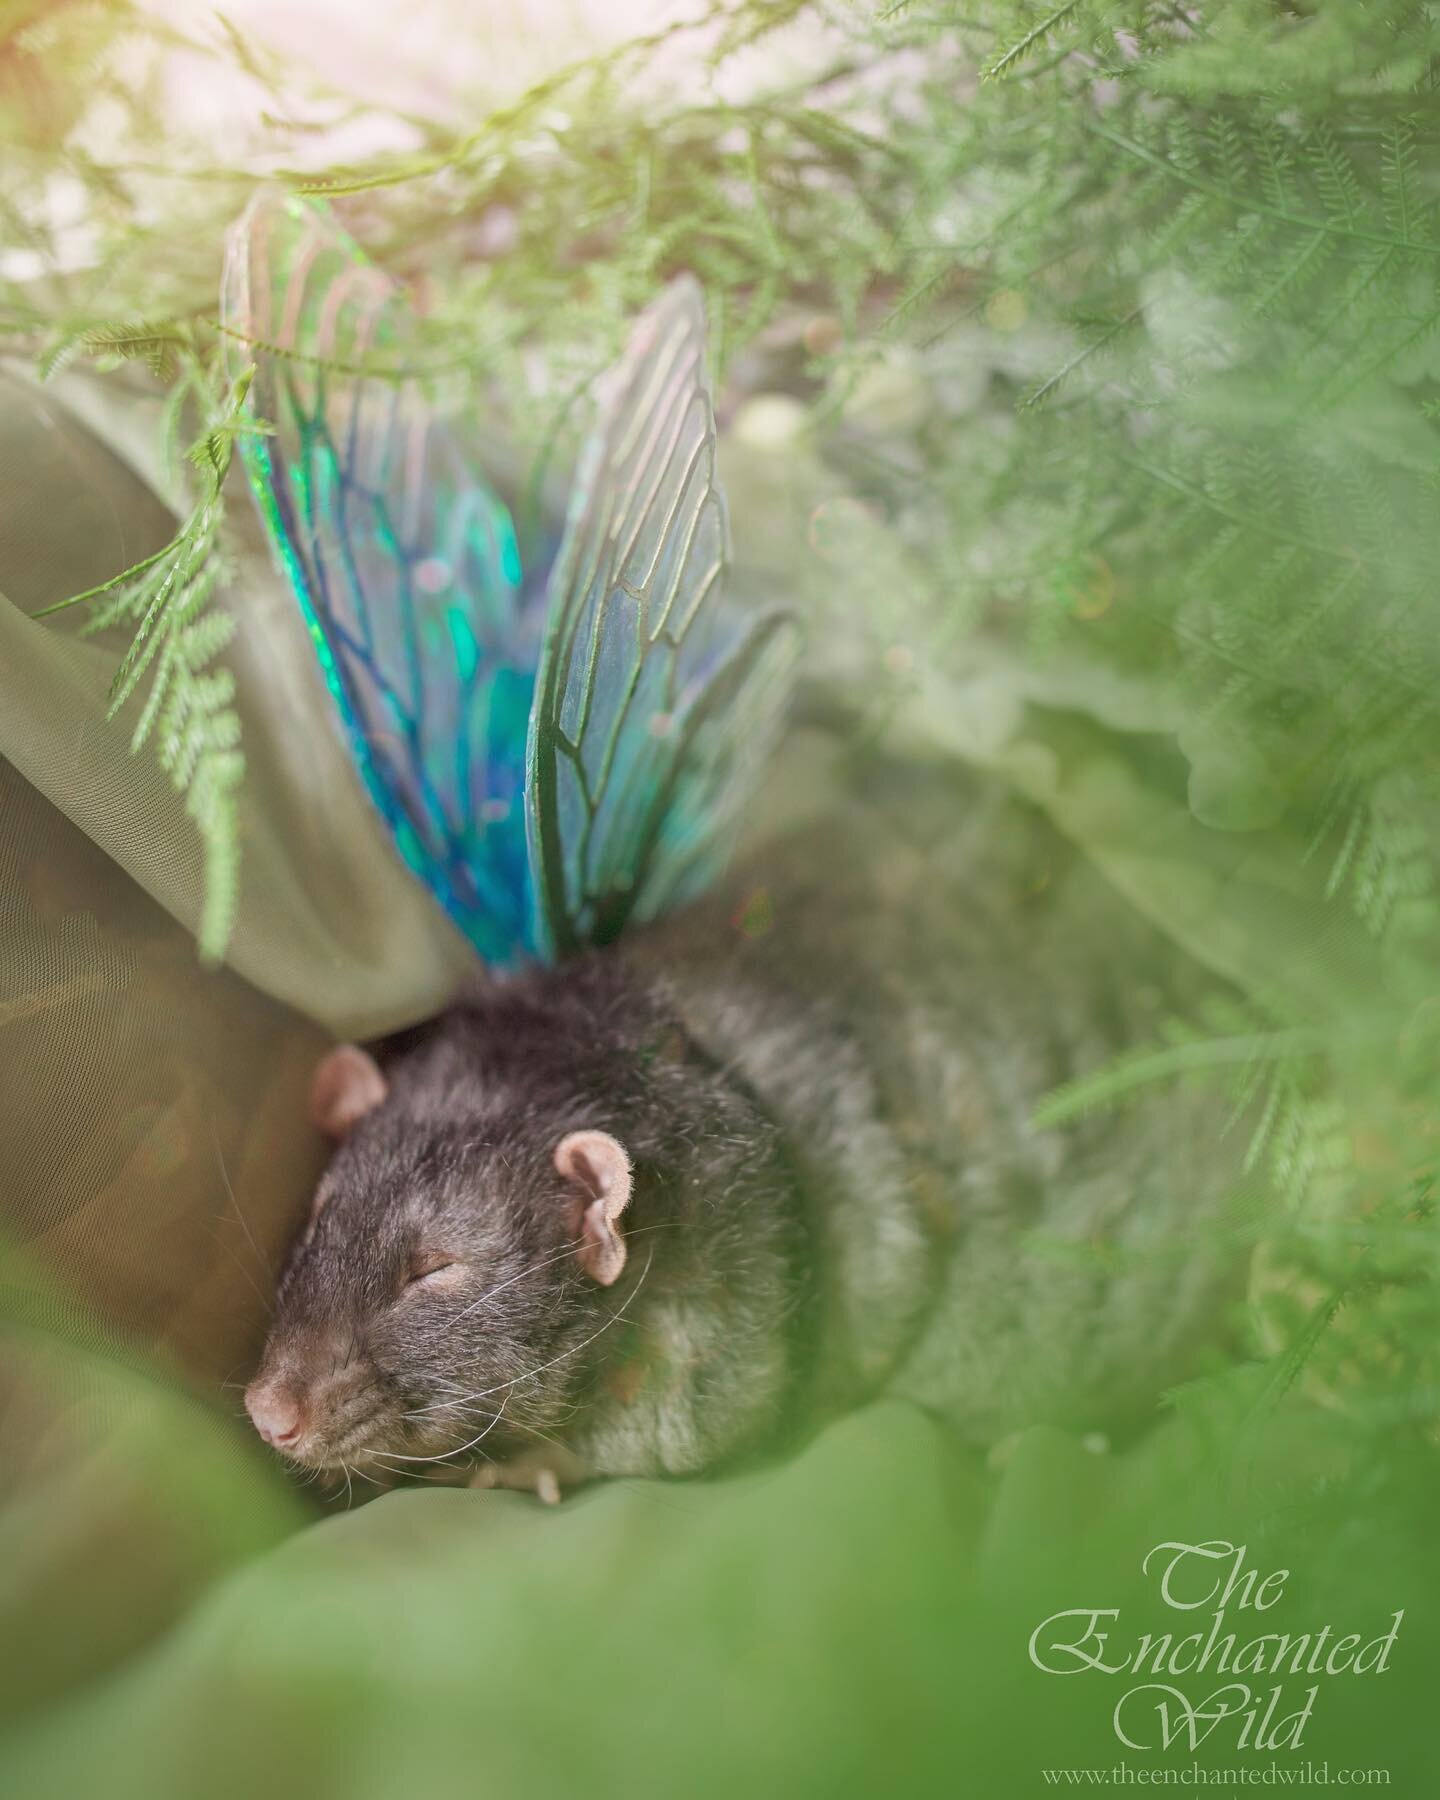 Magic is in everything around us, down to our itty bitty furry friends. Spent yesterday with @owlista&rsquo;s rat fosters who became the most exceptional little faeries. This sweetheart fell asleep in his wings, I could snuggle with him forever. 
I&r